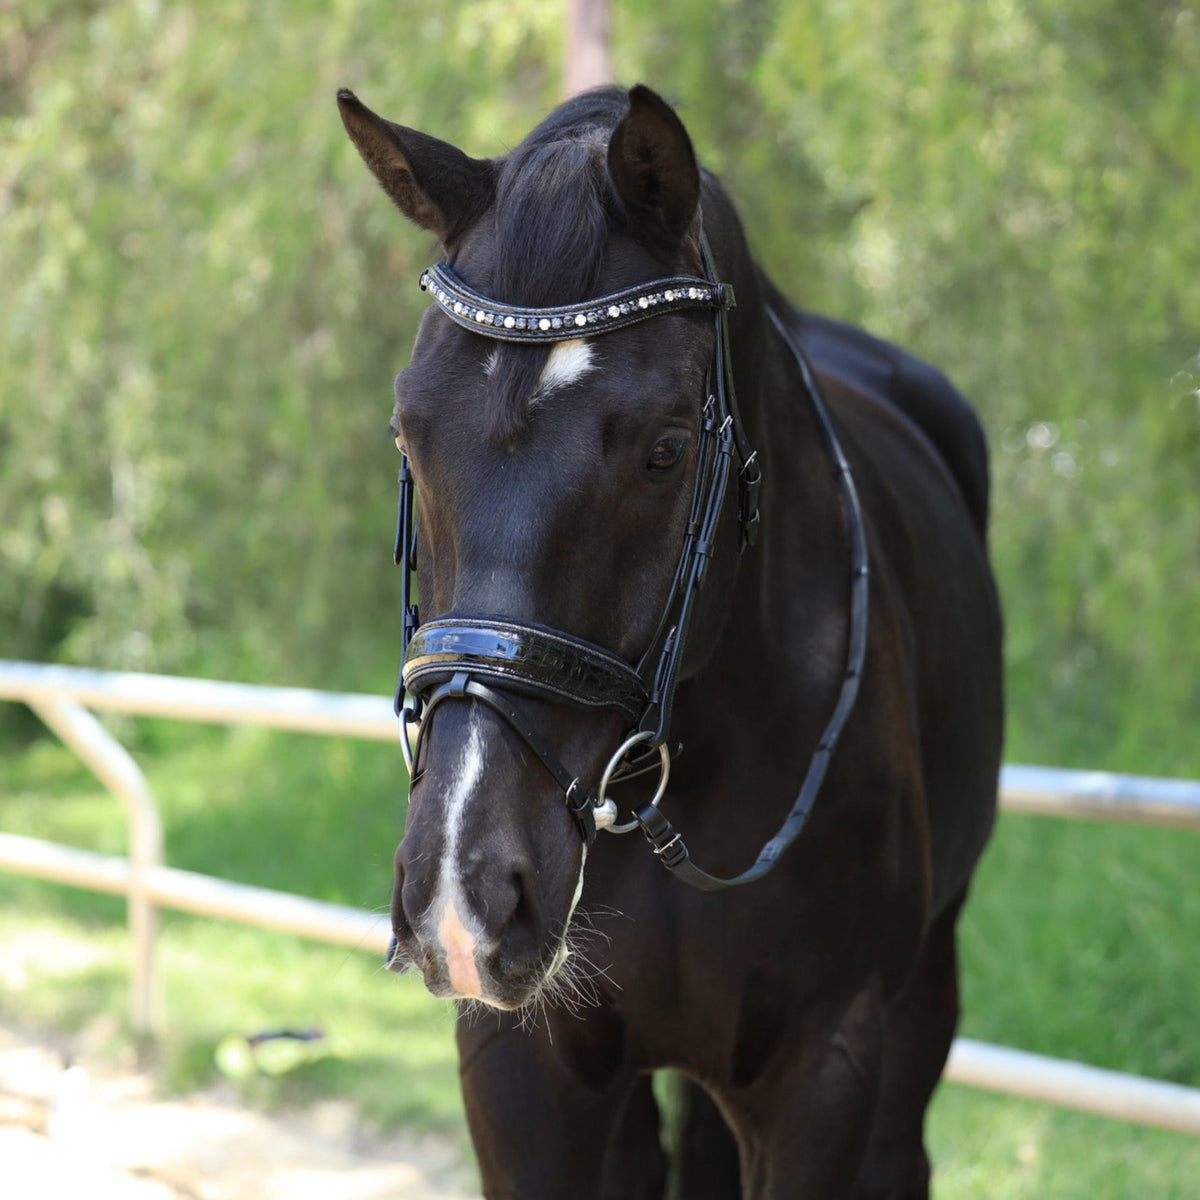 The Argentia Snaffle Bridle